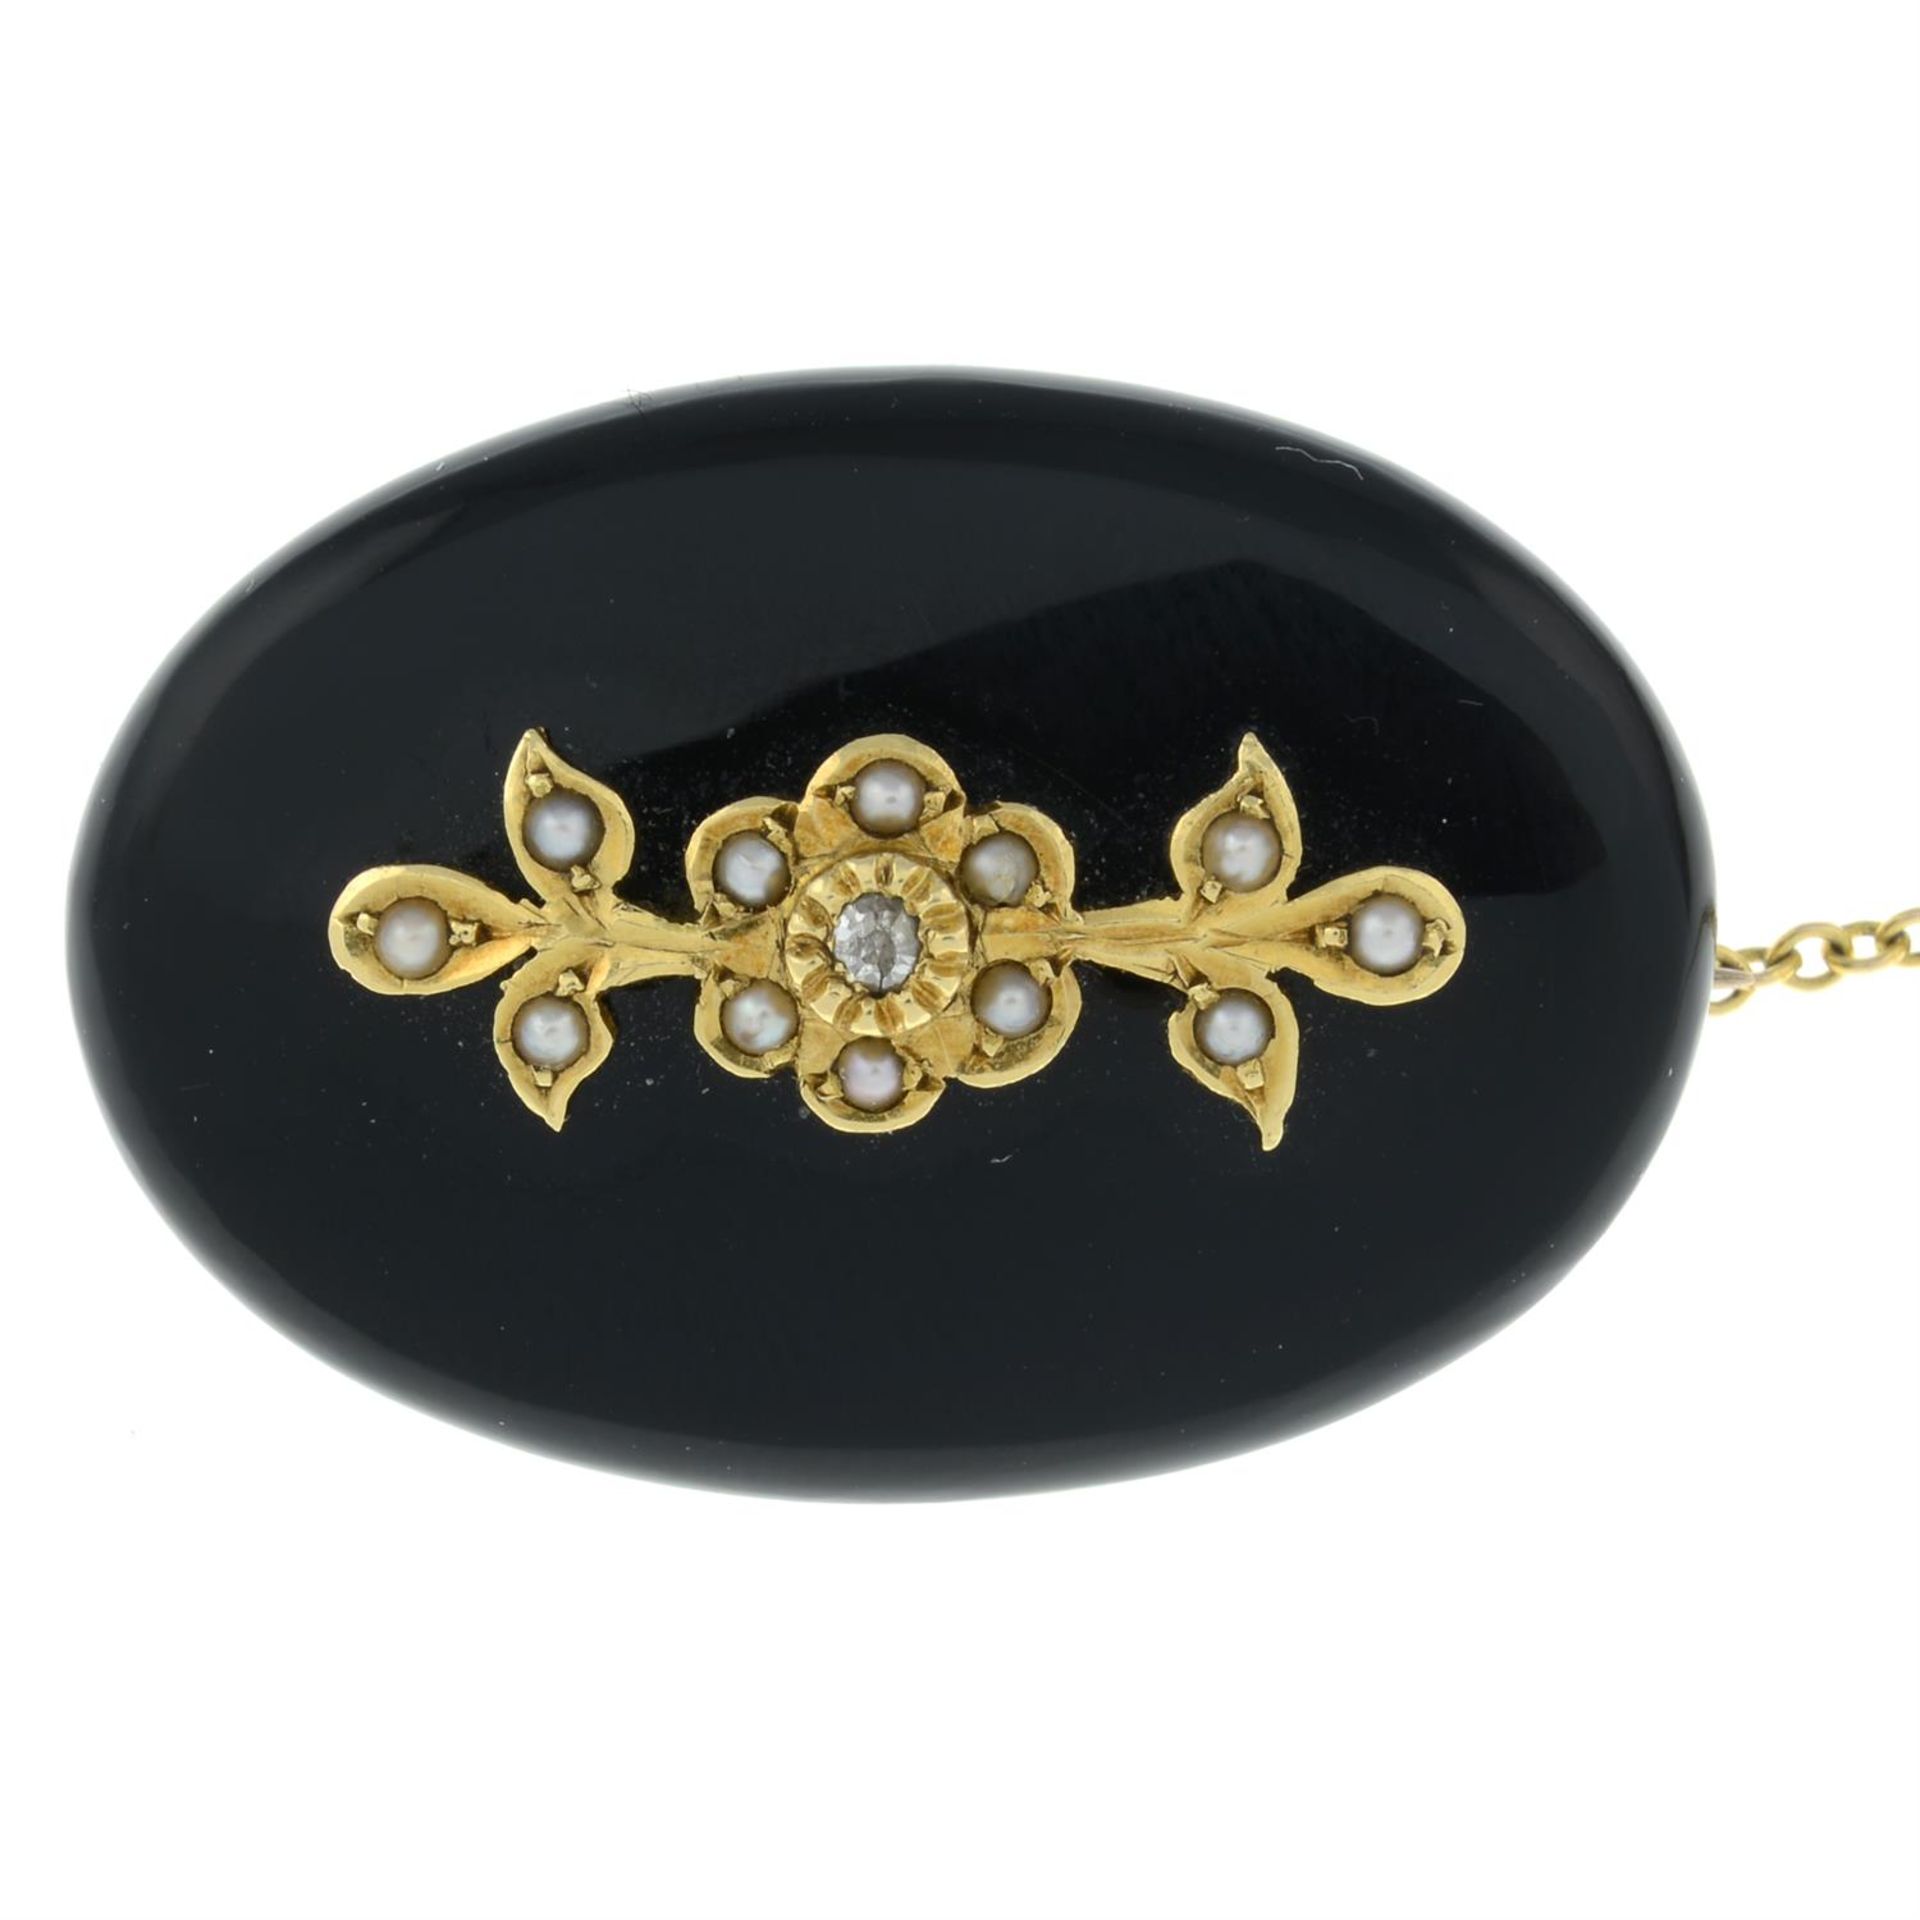 A Victorian 18ct gold onyx, split pearl and old-cut diamond accent mourning locket brooch.